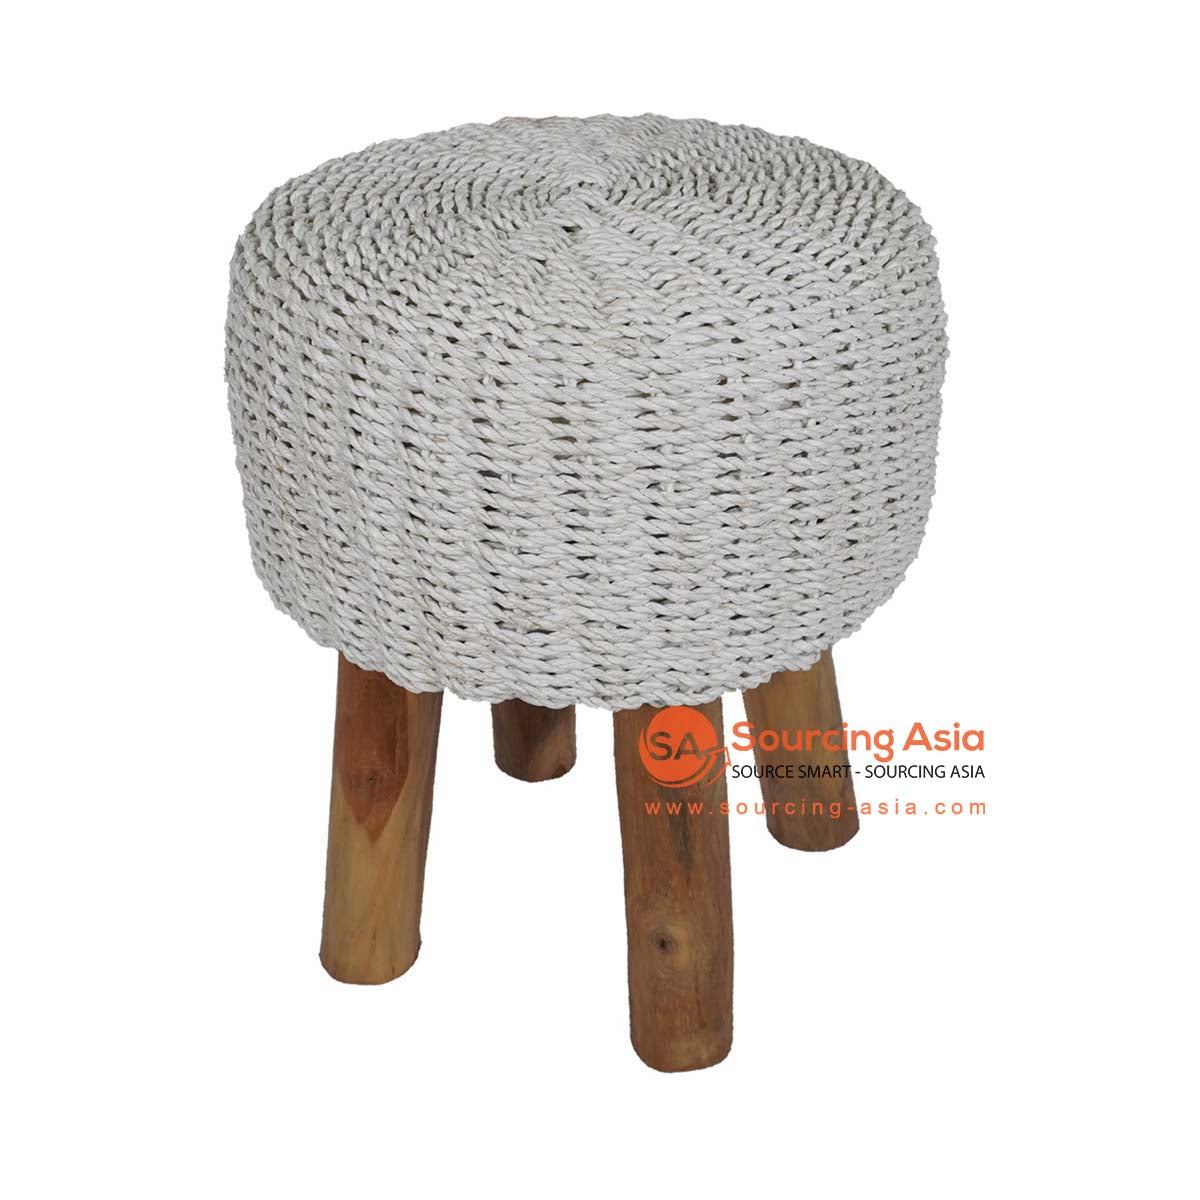 HBSC603 WHITE PLASTIC AND NATURAL WOOD ROUND STOOL